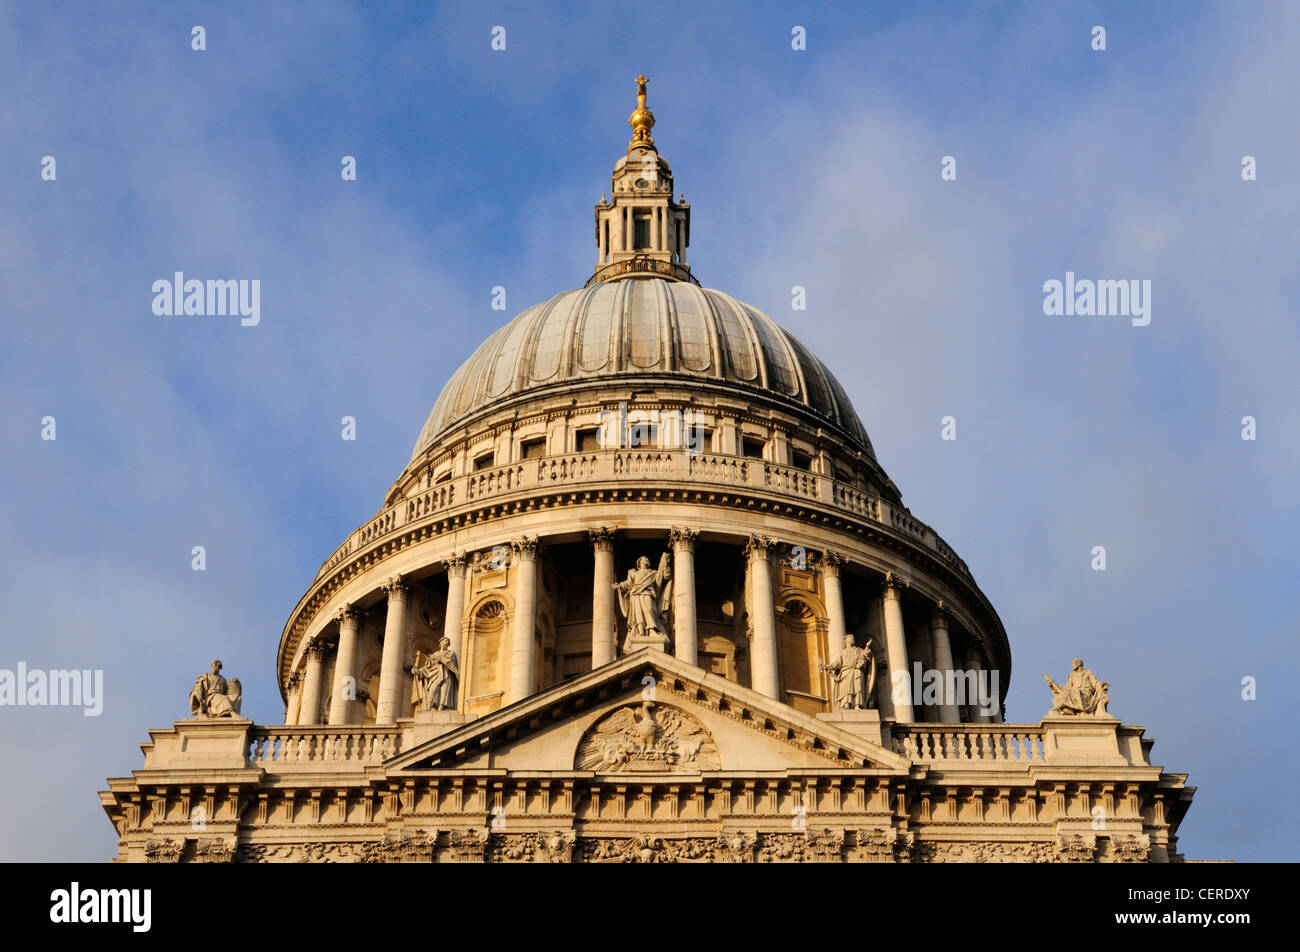 The world famous dome on top of St Paul's Cathedral, an iconic landmark on the London skyline. Stock Photo